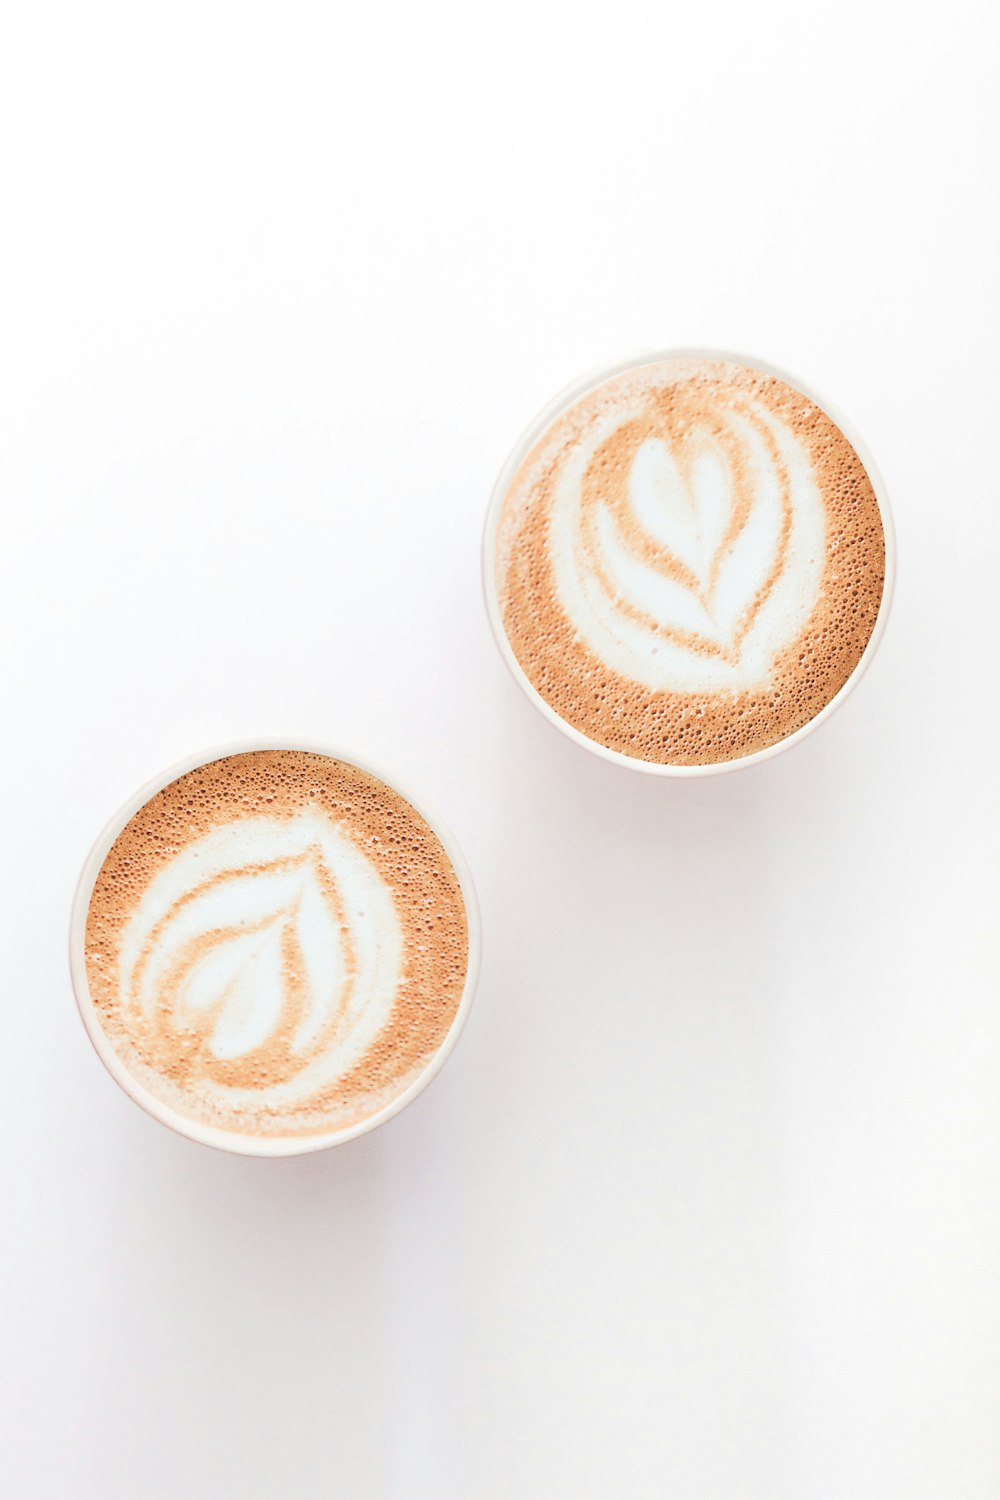 brown and white heart shaped cappuccino